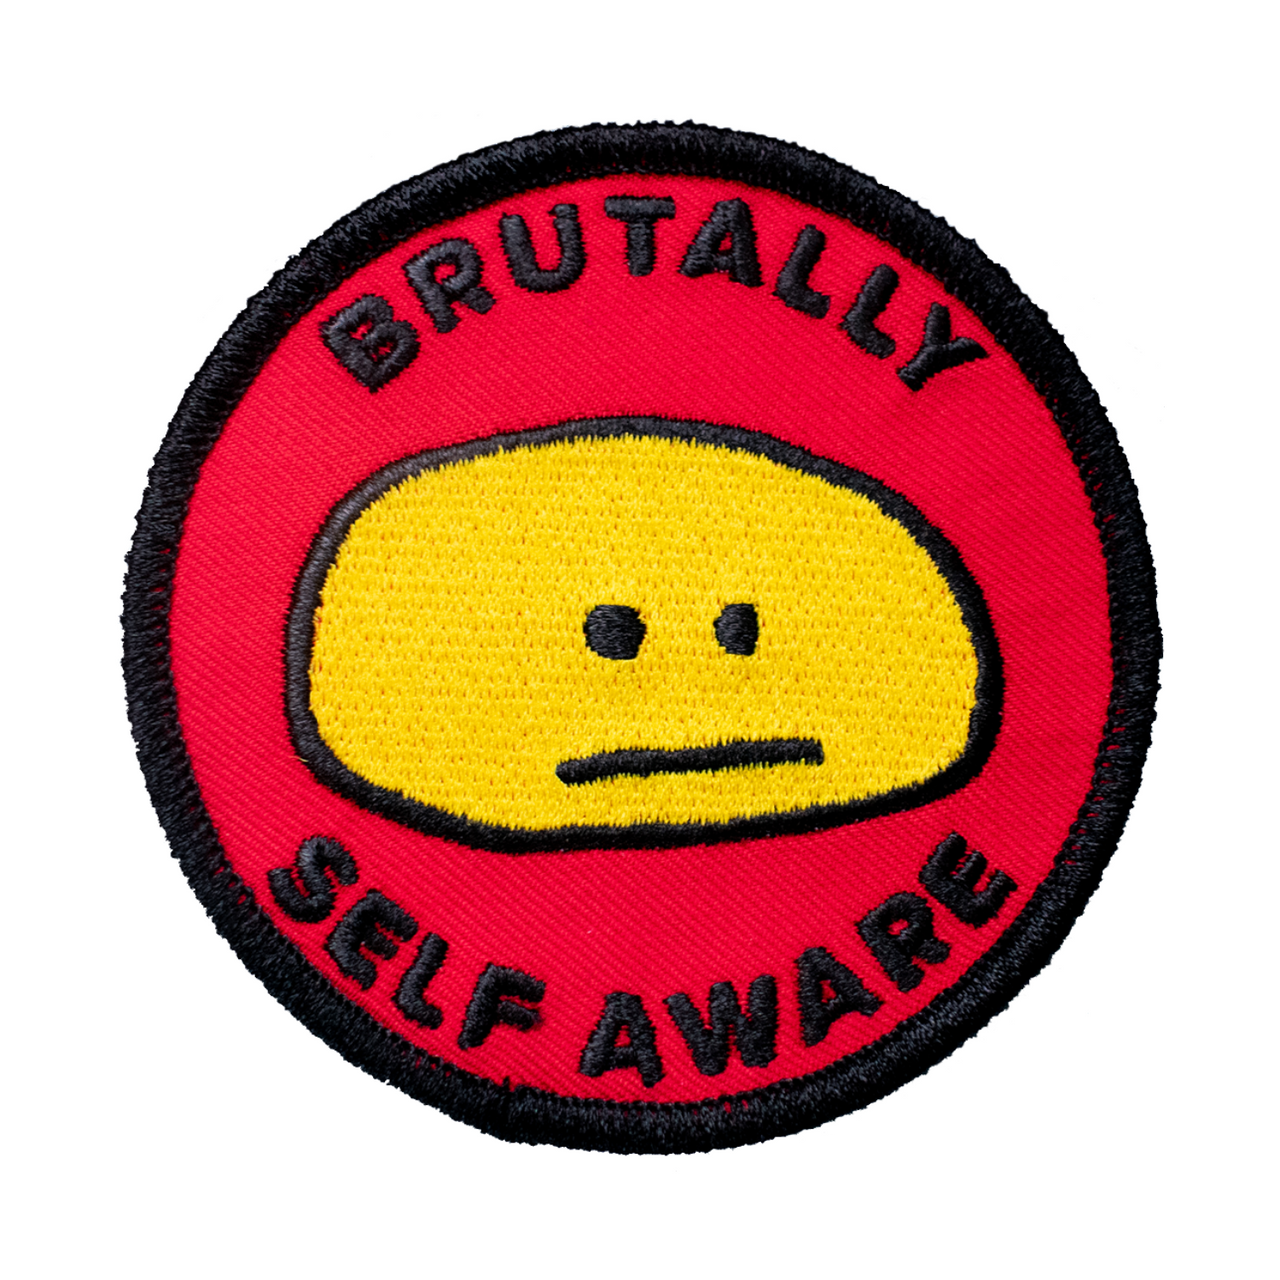 Brutally Self Aware (Iron-On Patch)